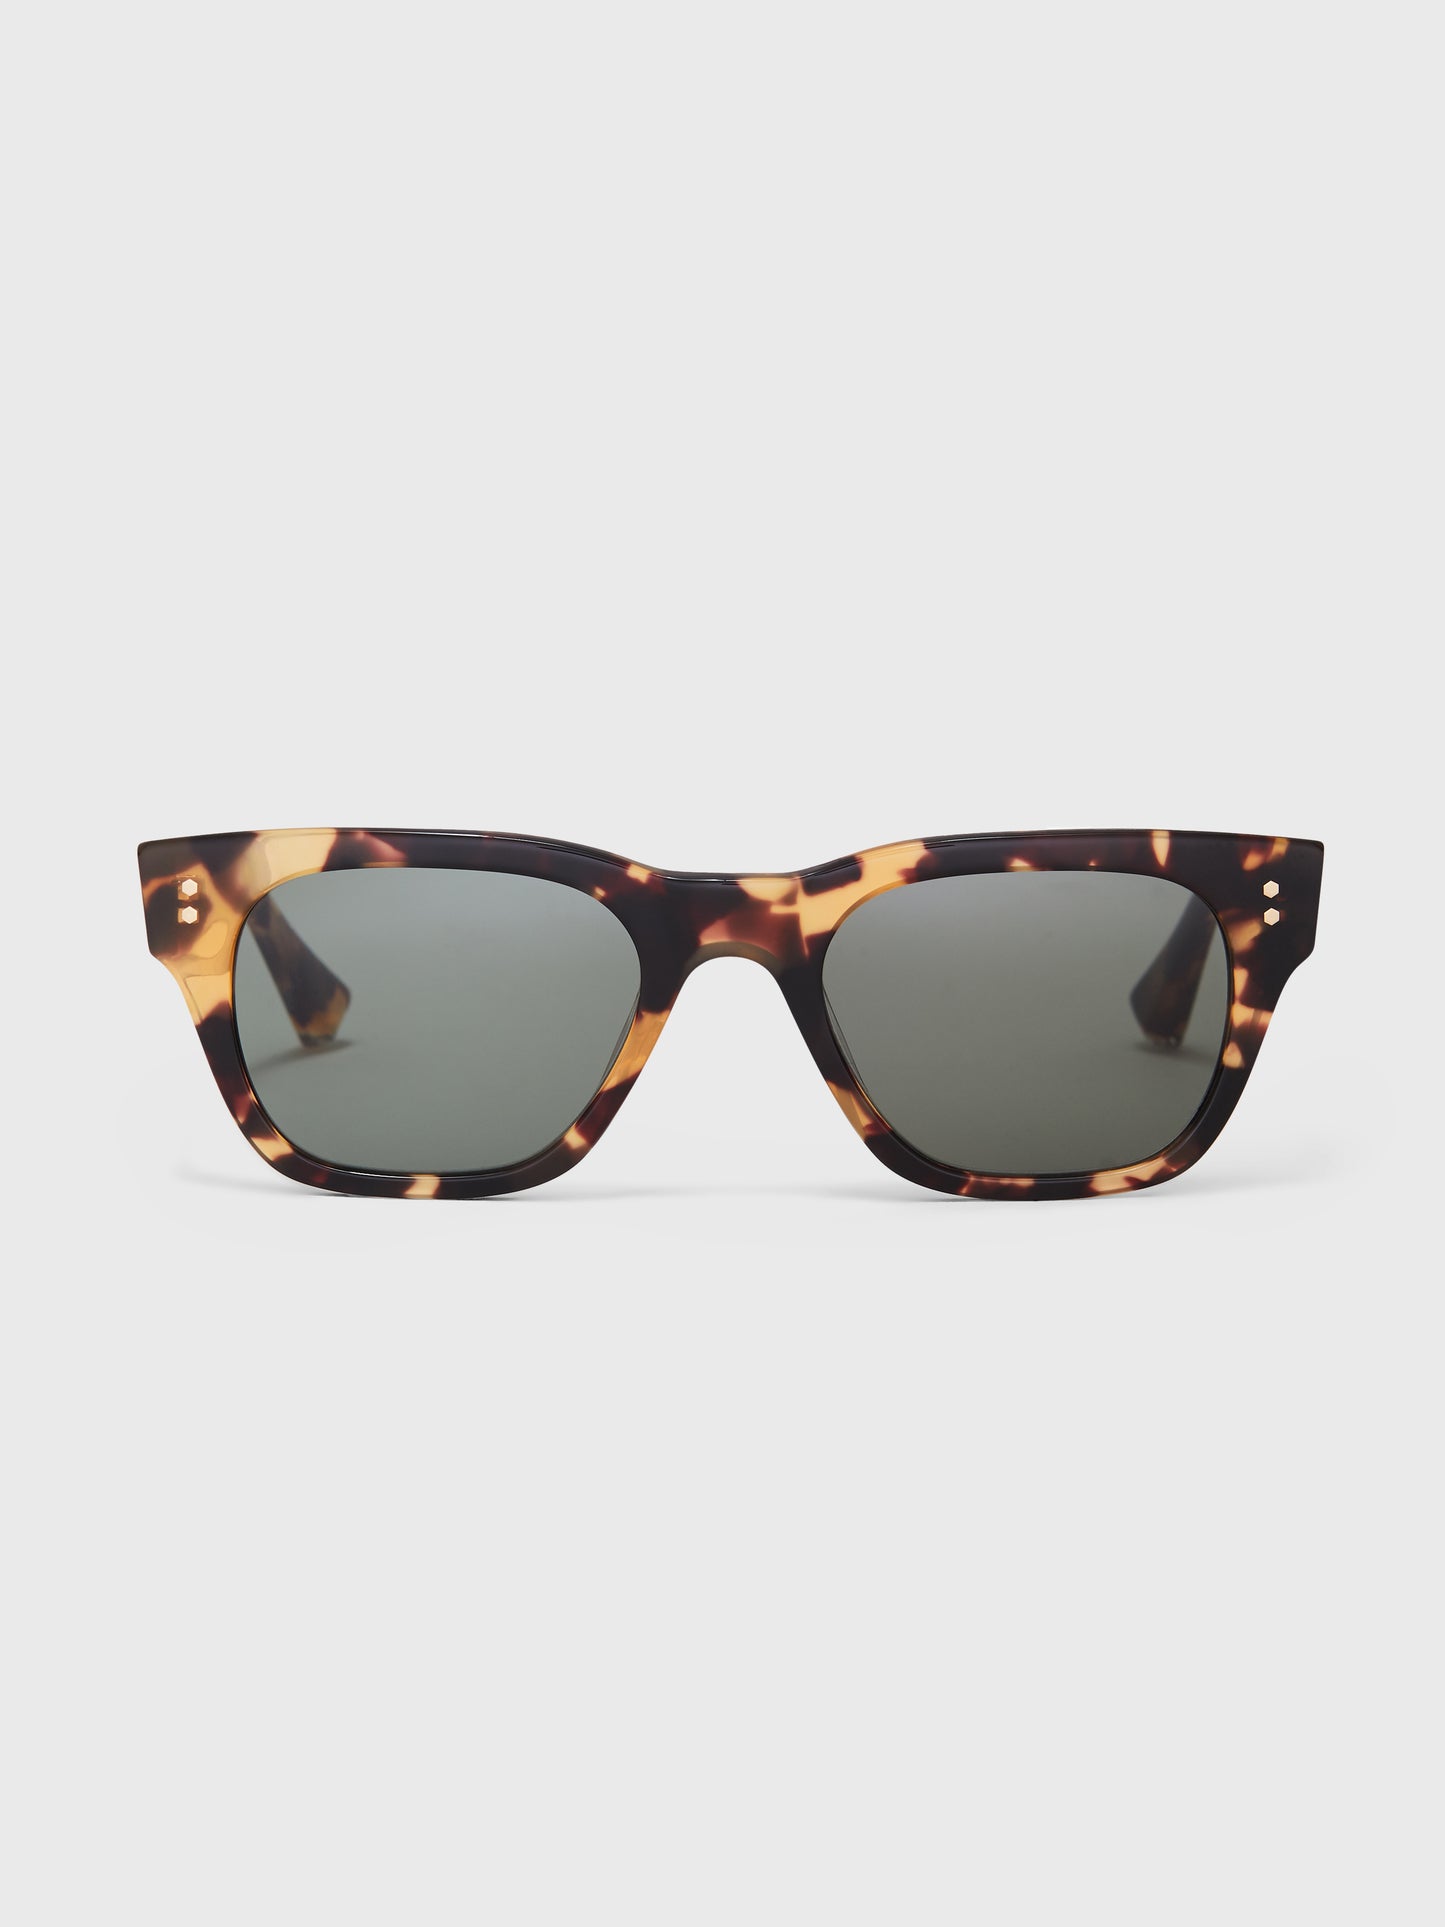 Image 1 of James Sunglasses by Taylor Morris